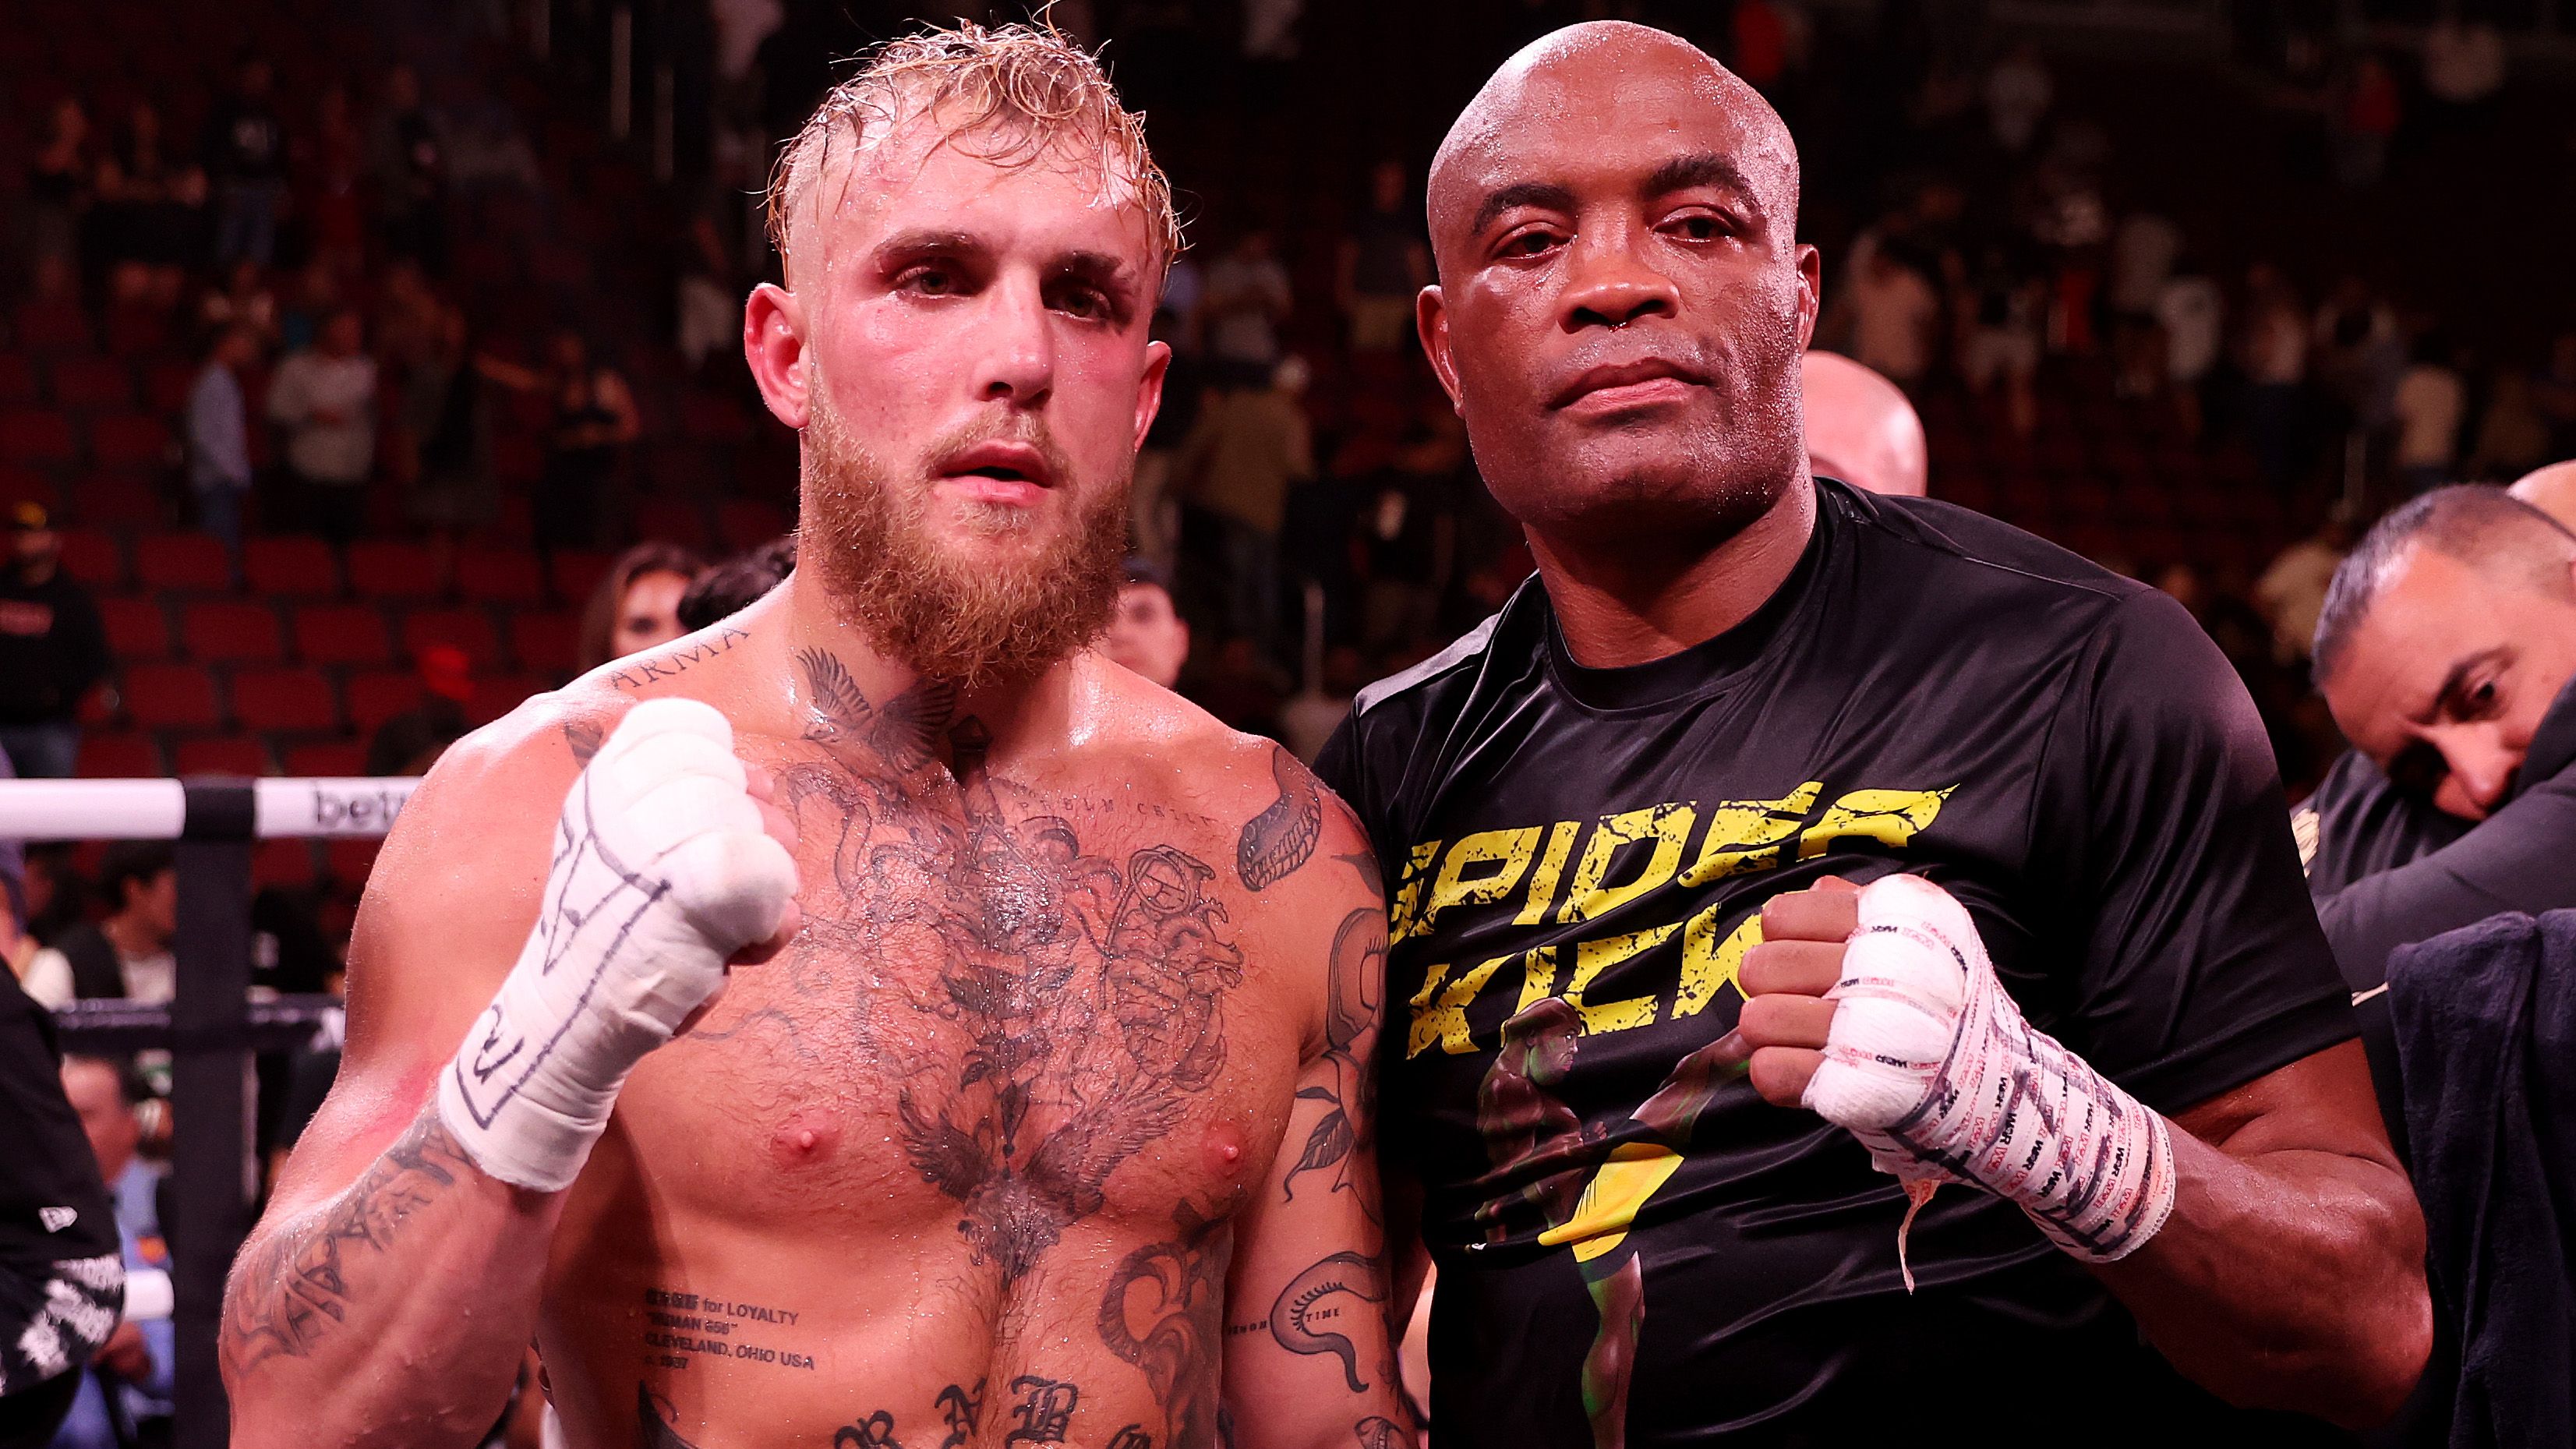 Jake Paul (L) poses with Anderson Silva of Brazil after their cruiserweight bout at Gila River Arena on October 29, 2022 in Glendale, Arizona. Paul won via unanimous decision. (Photo by Christian Petersen/Getty Images)